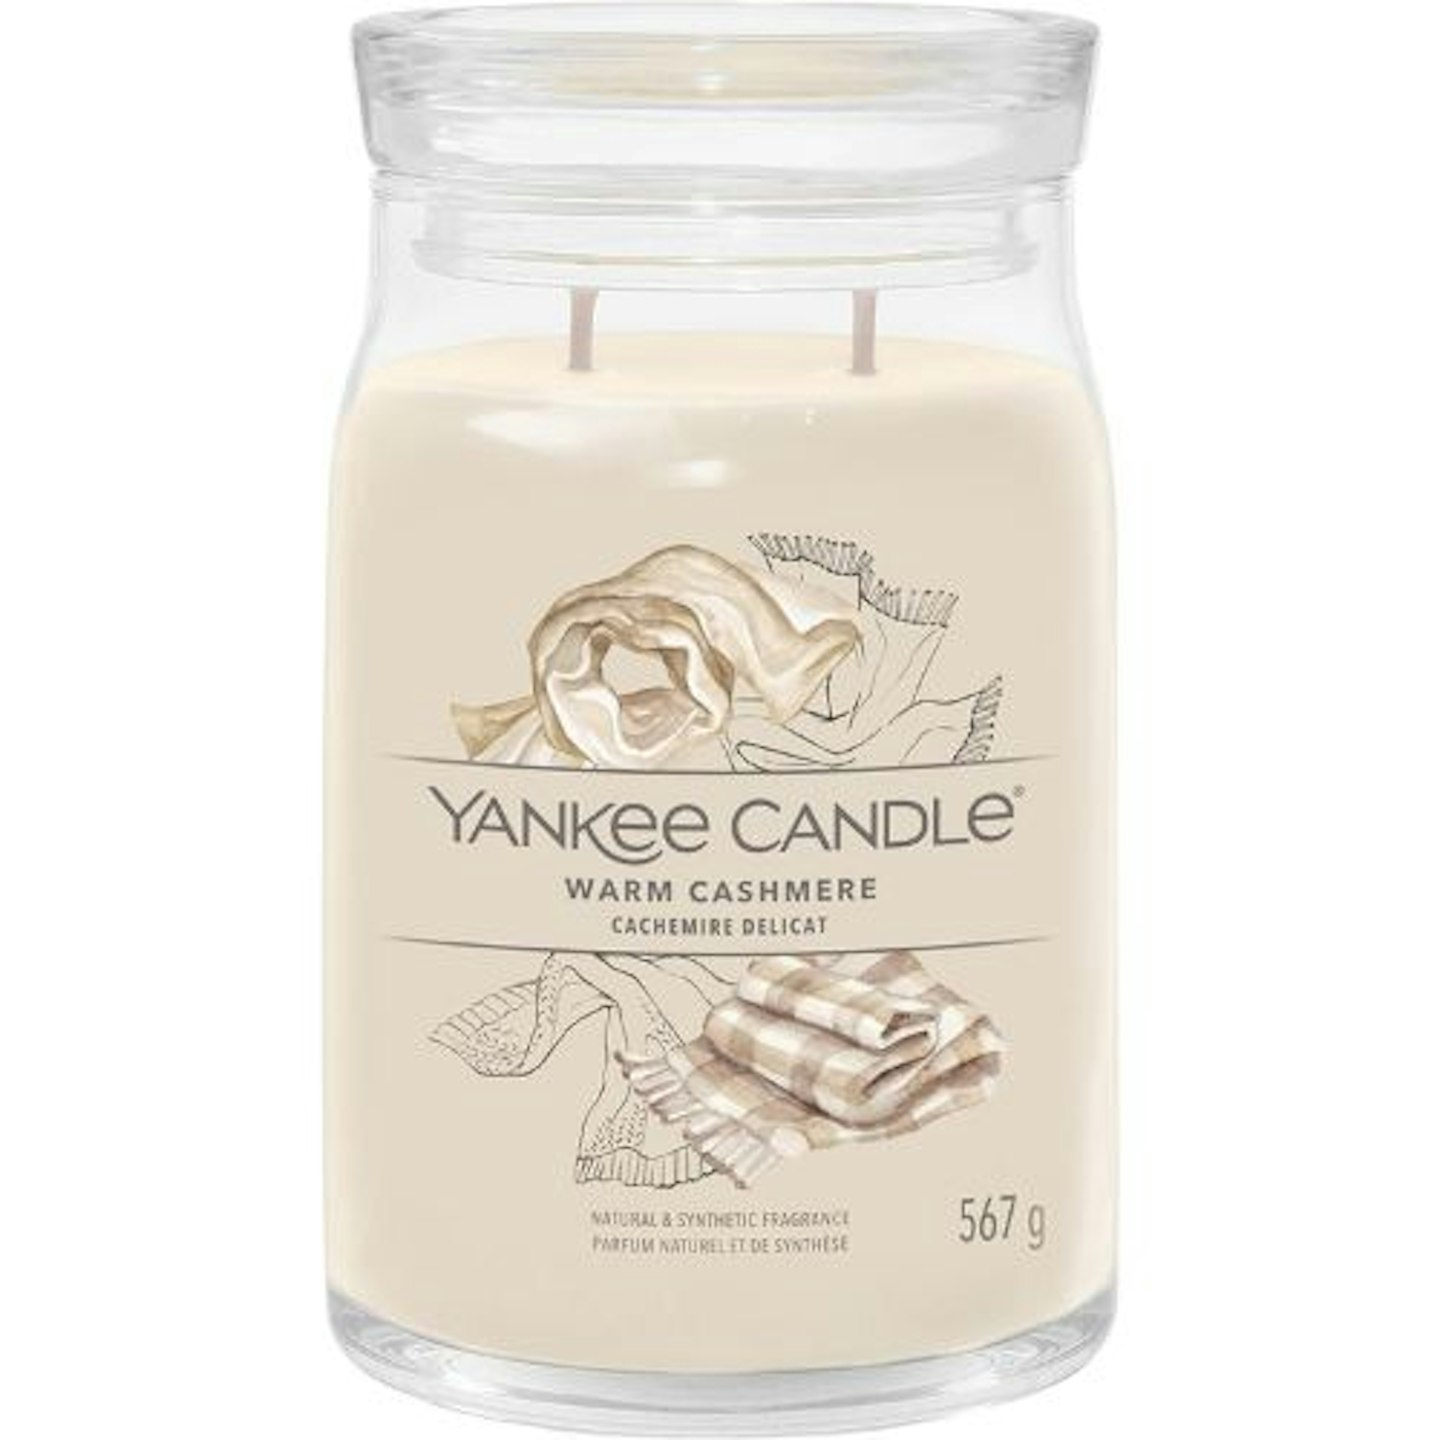 Yankee Candle Signature Scented Candle Warm Cashmere Large